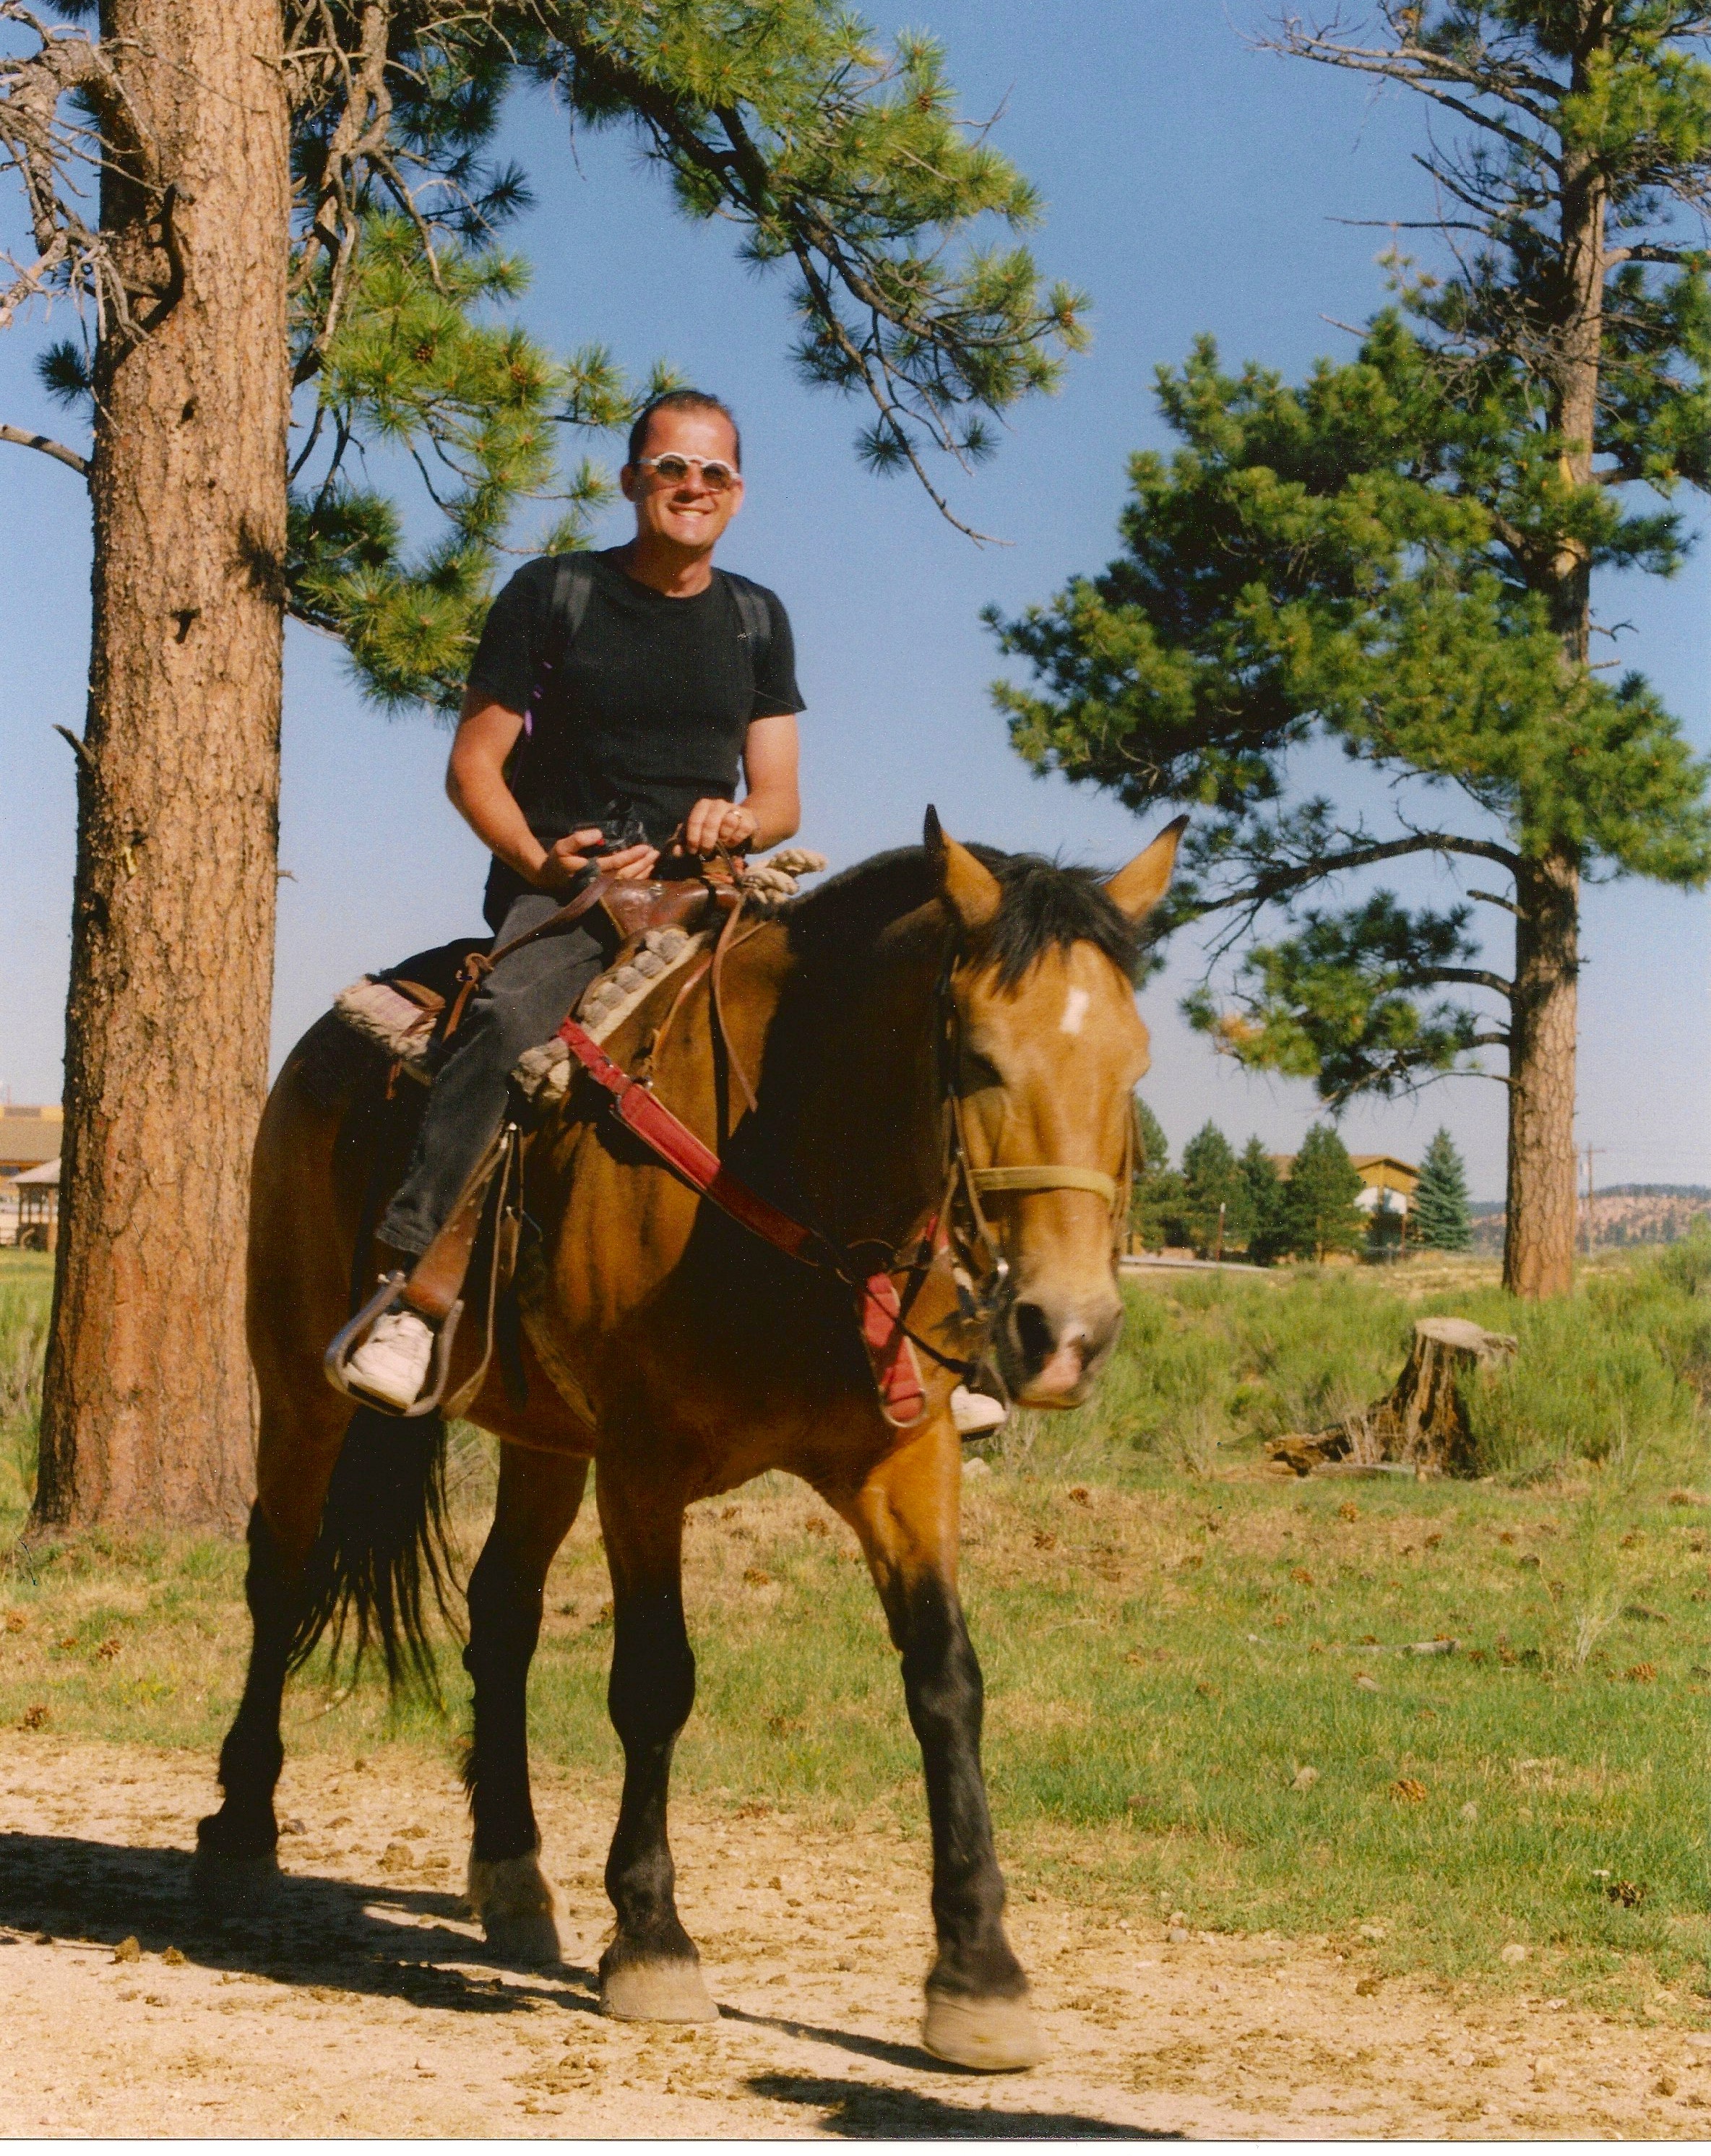 dominique riding a horse in Bryce Canyon